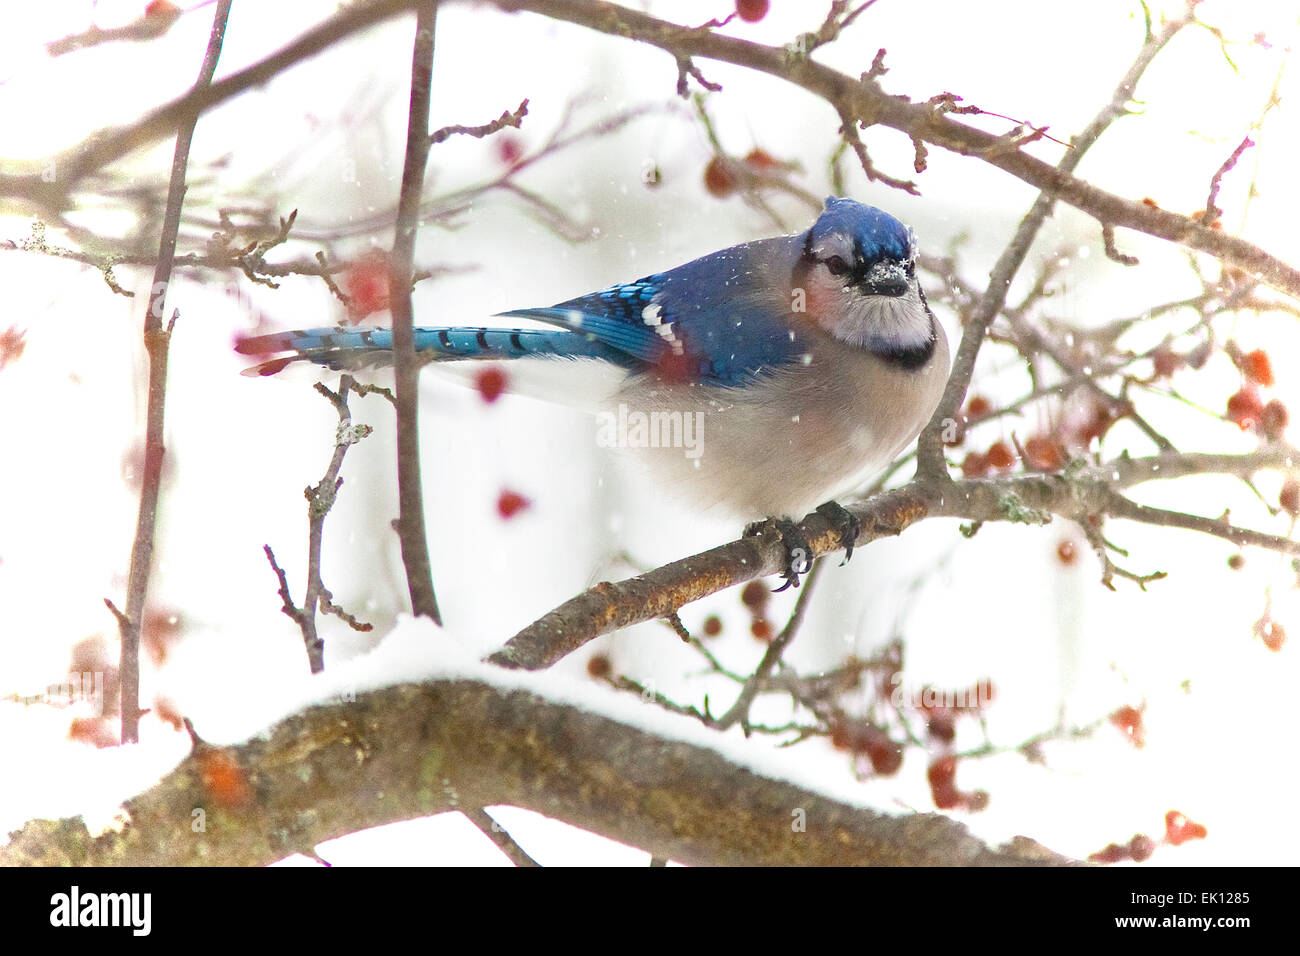 A bluejay sitting on a crab apple tree branch Stock Photo